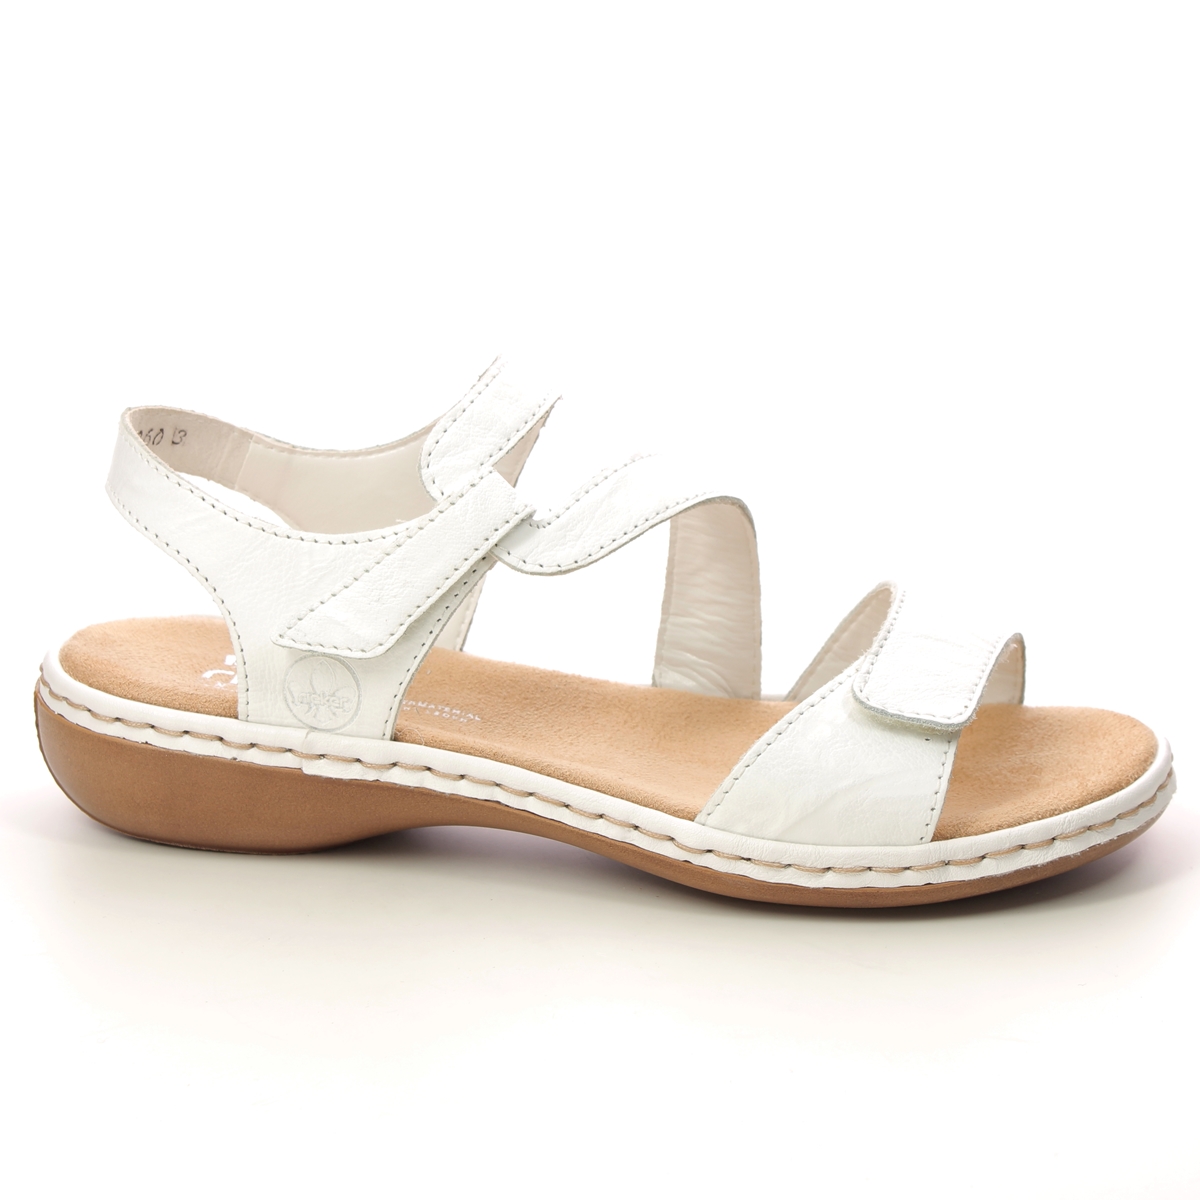 Rieker 659C7-80 WHITE LEATHER Womens Comfortable Sandals